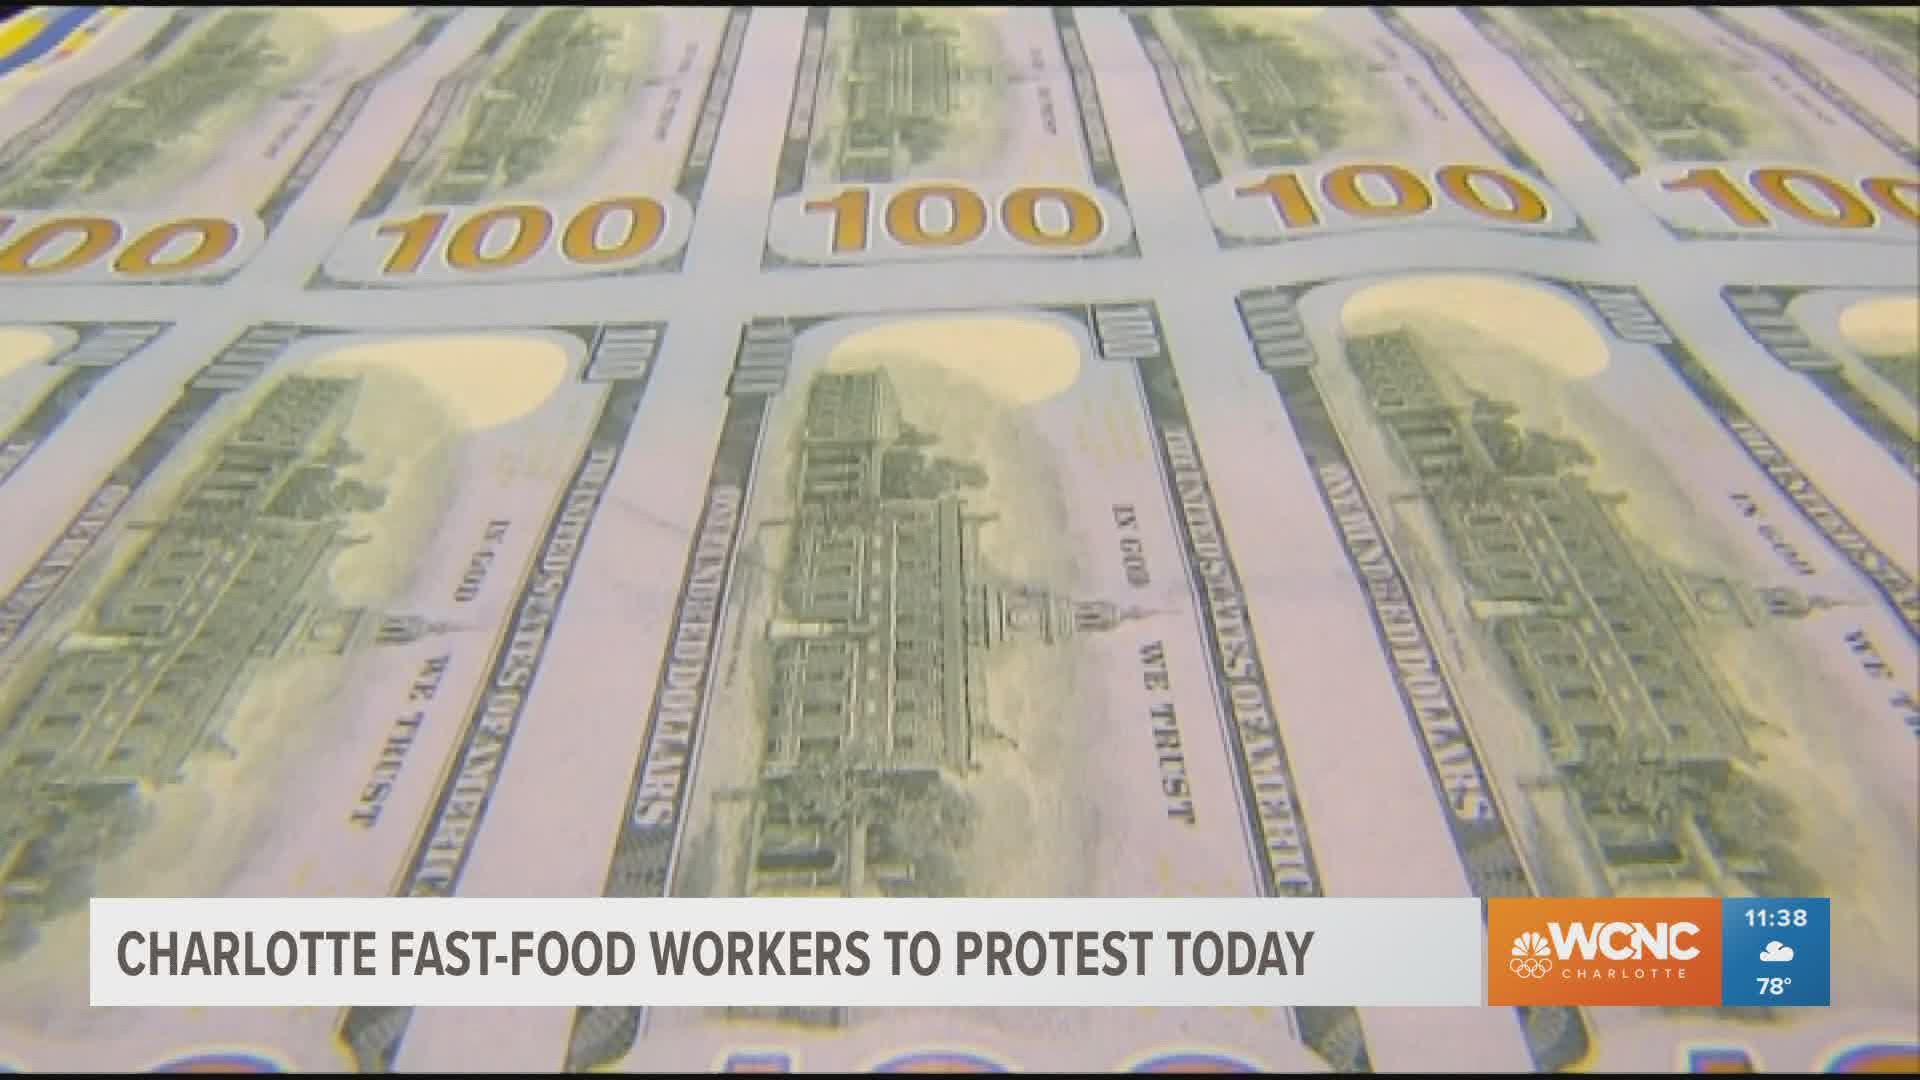 They are calling on lawmakers to increase the minimum wage